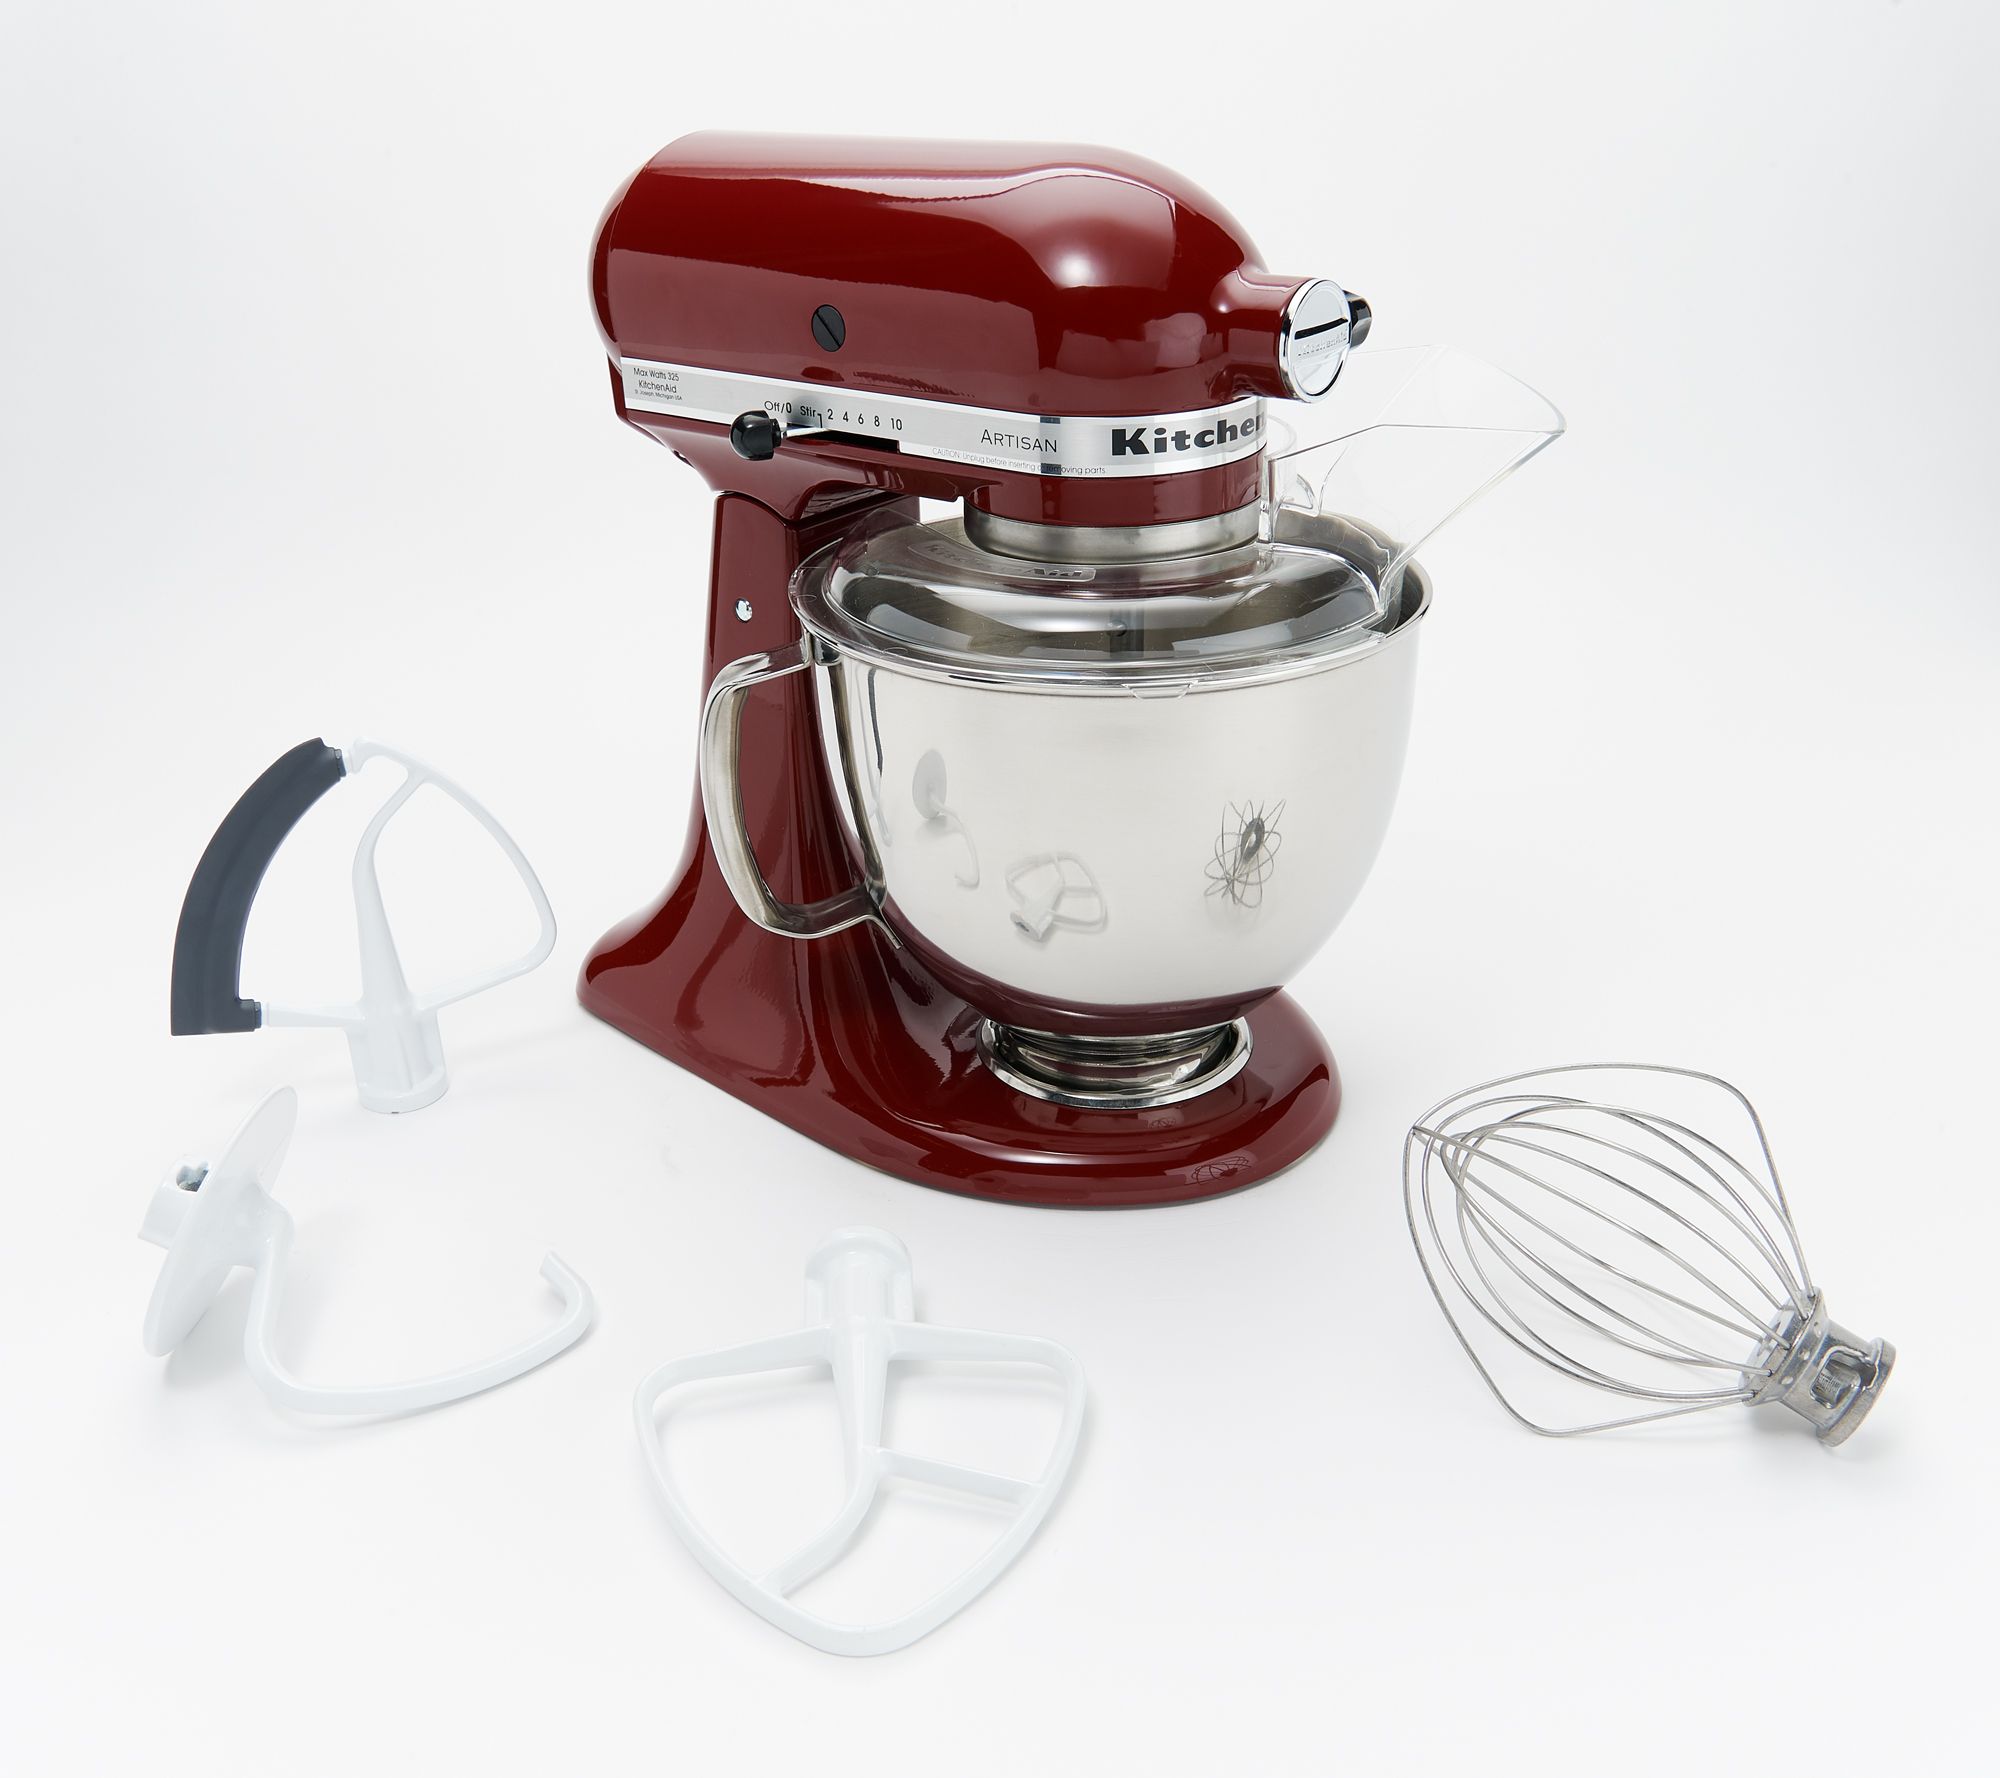 KitchenAid Mixer: Get this baking essential on sale at QVC today